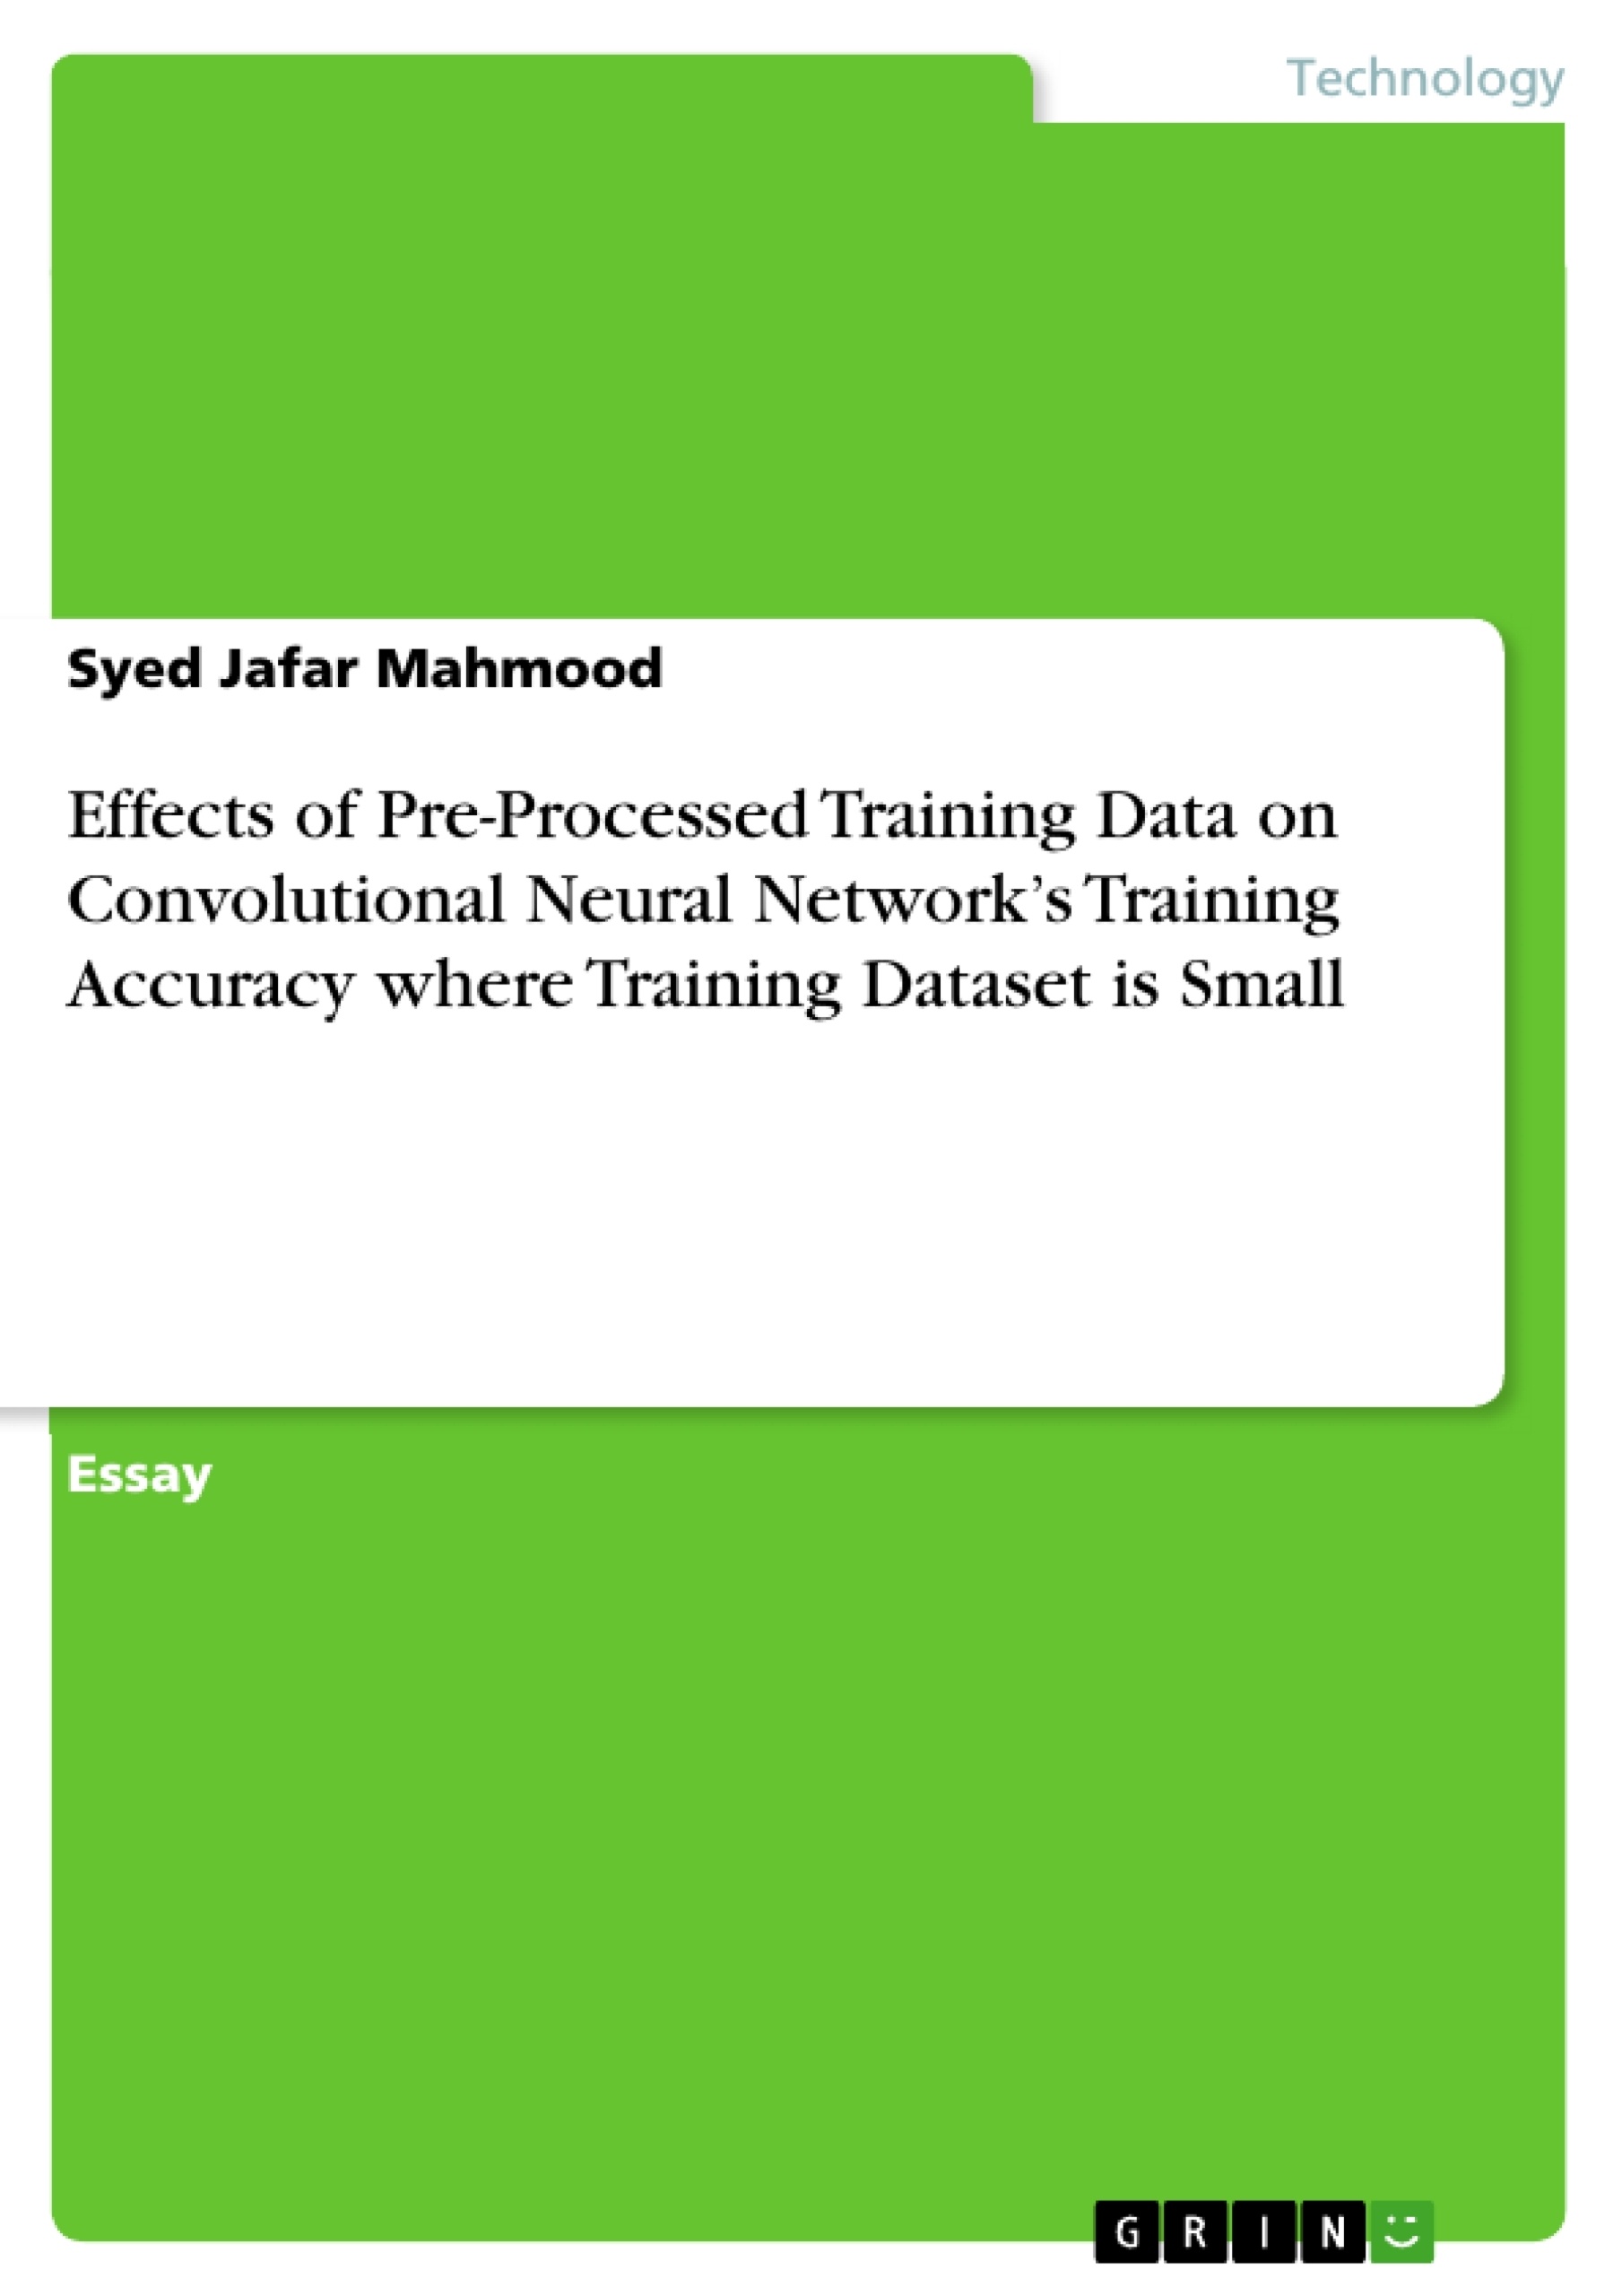 Title: Effects of Pre-Processed Training Data on Convolutional Neural Network’s Training Accuracy where Training Dataset is Small